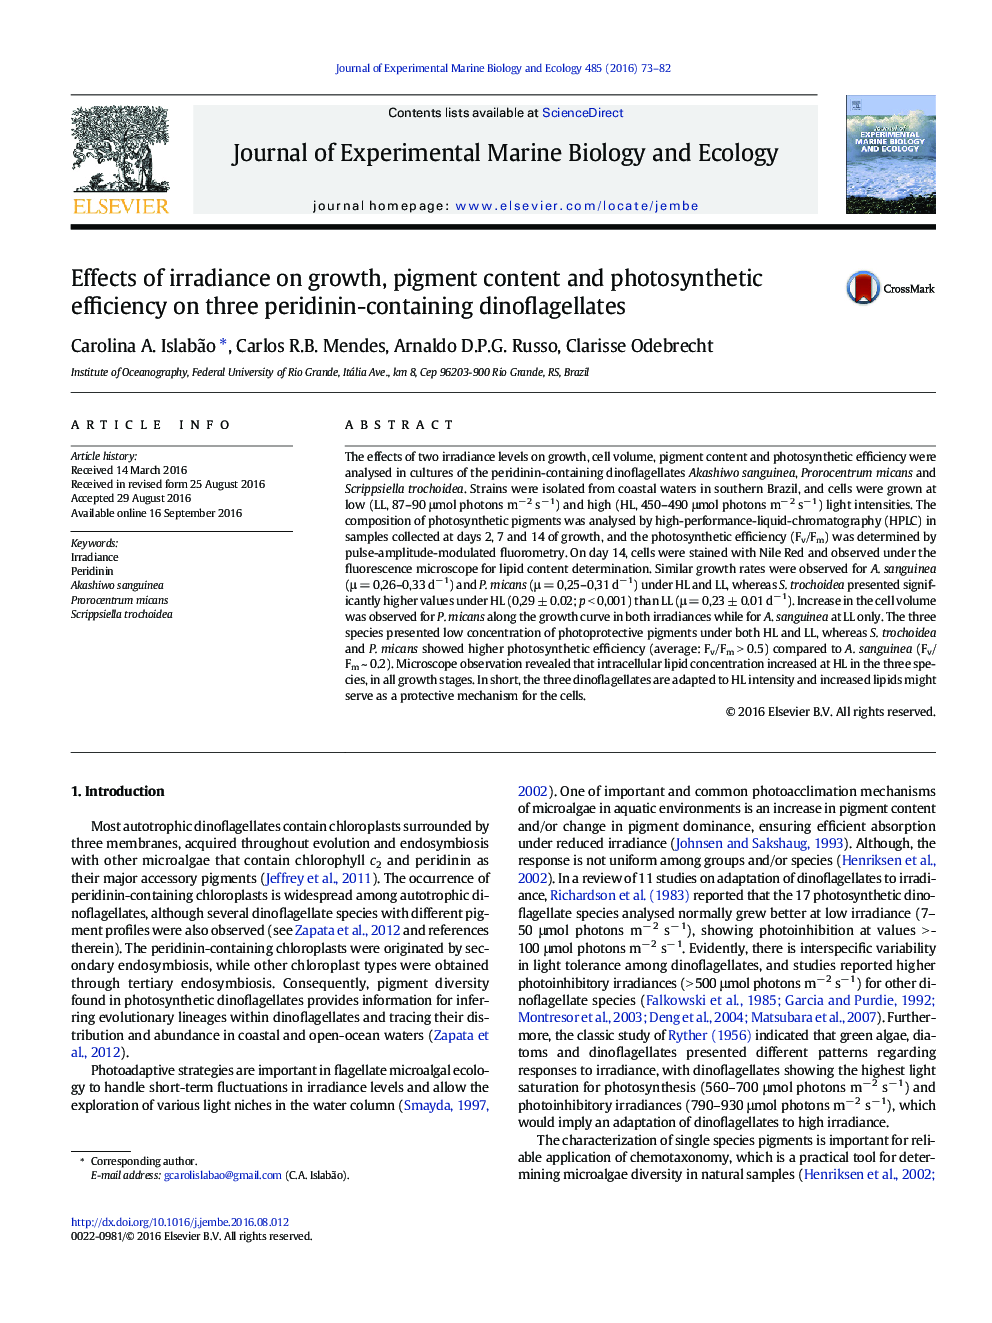 Effects of irradiance on growth, pigment content and photosynthetic efficiency on three peridinin-containing dinoflagellates